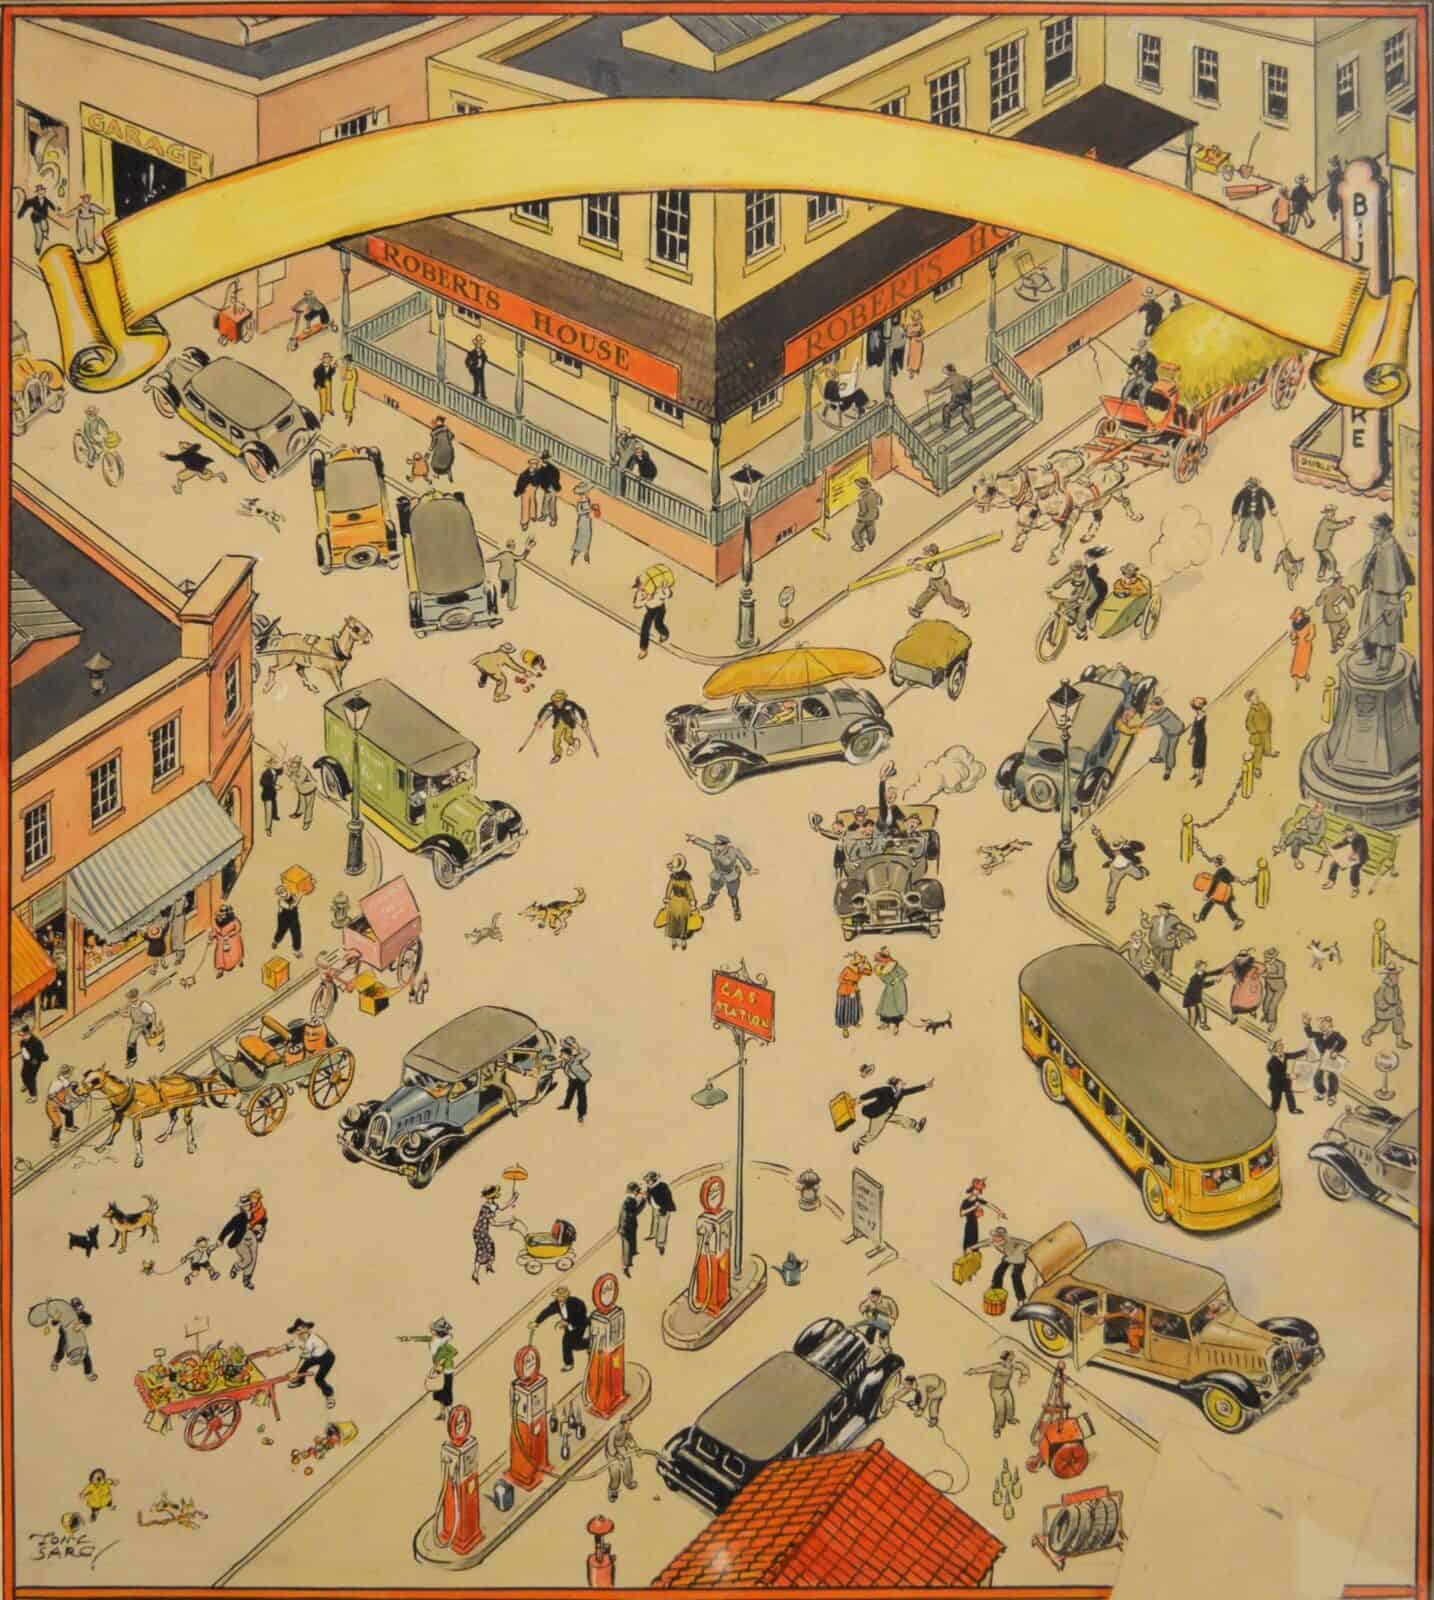 An intersection fills with traffic of all kinds in Tony Sarg's illustration of early 20th-century New York.